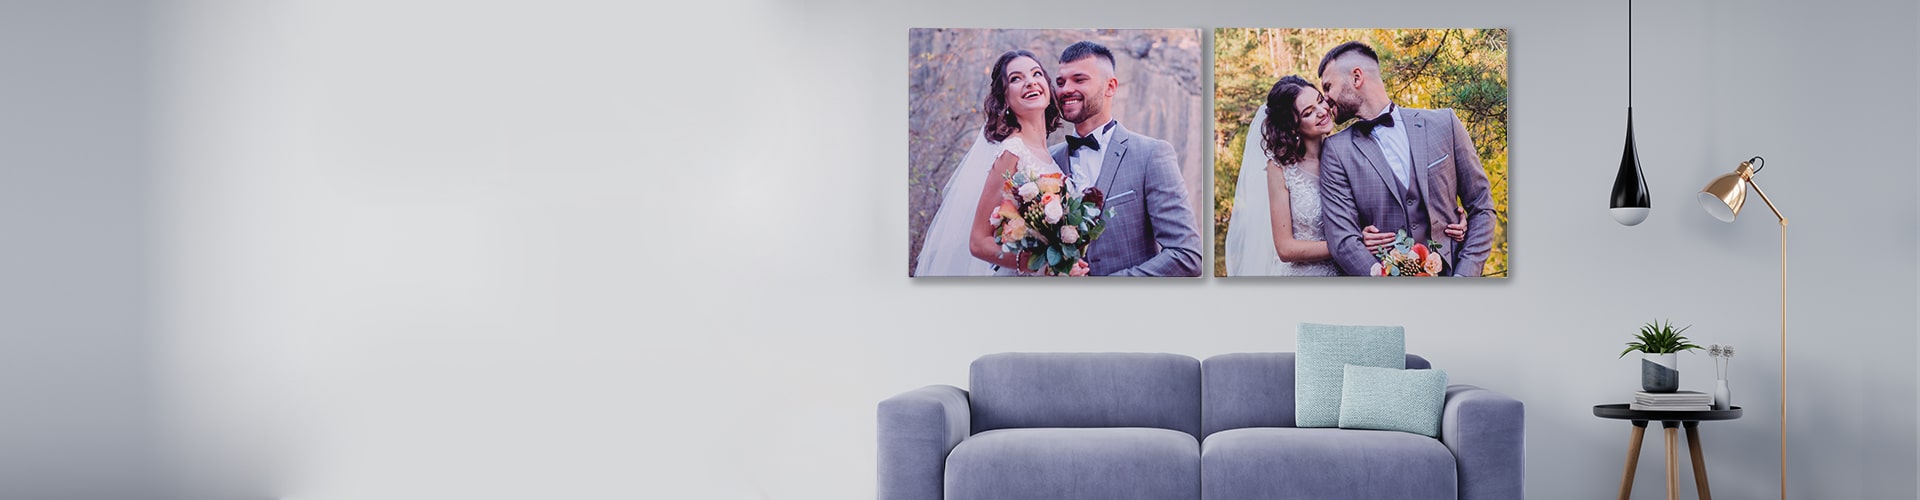 Personalized Wedding Canvas